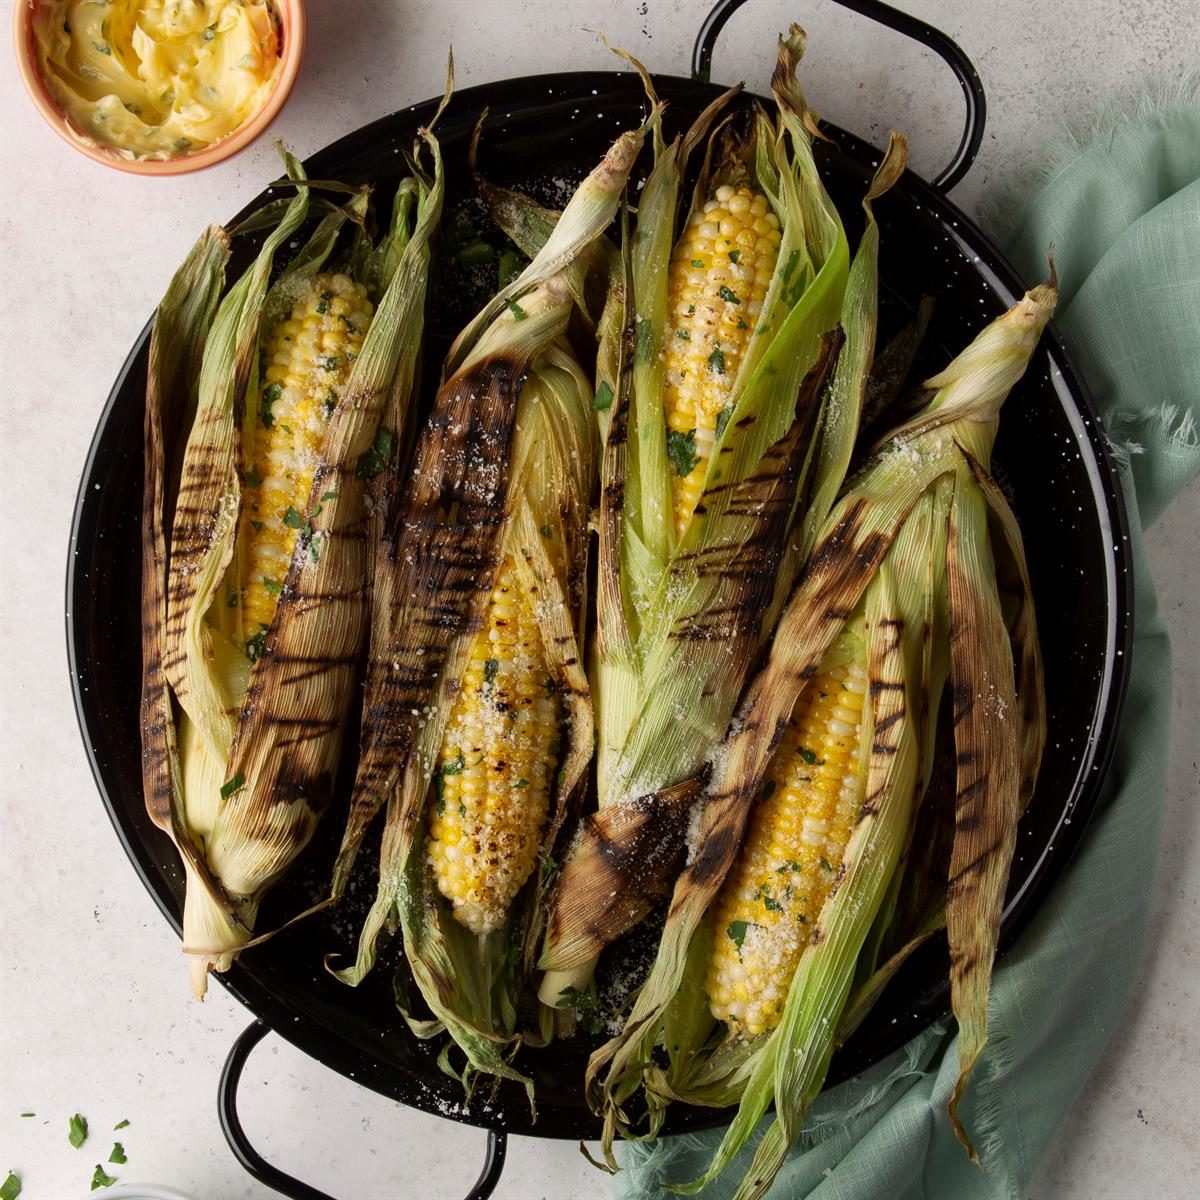 New Jersey: Grilled Corn in Husks